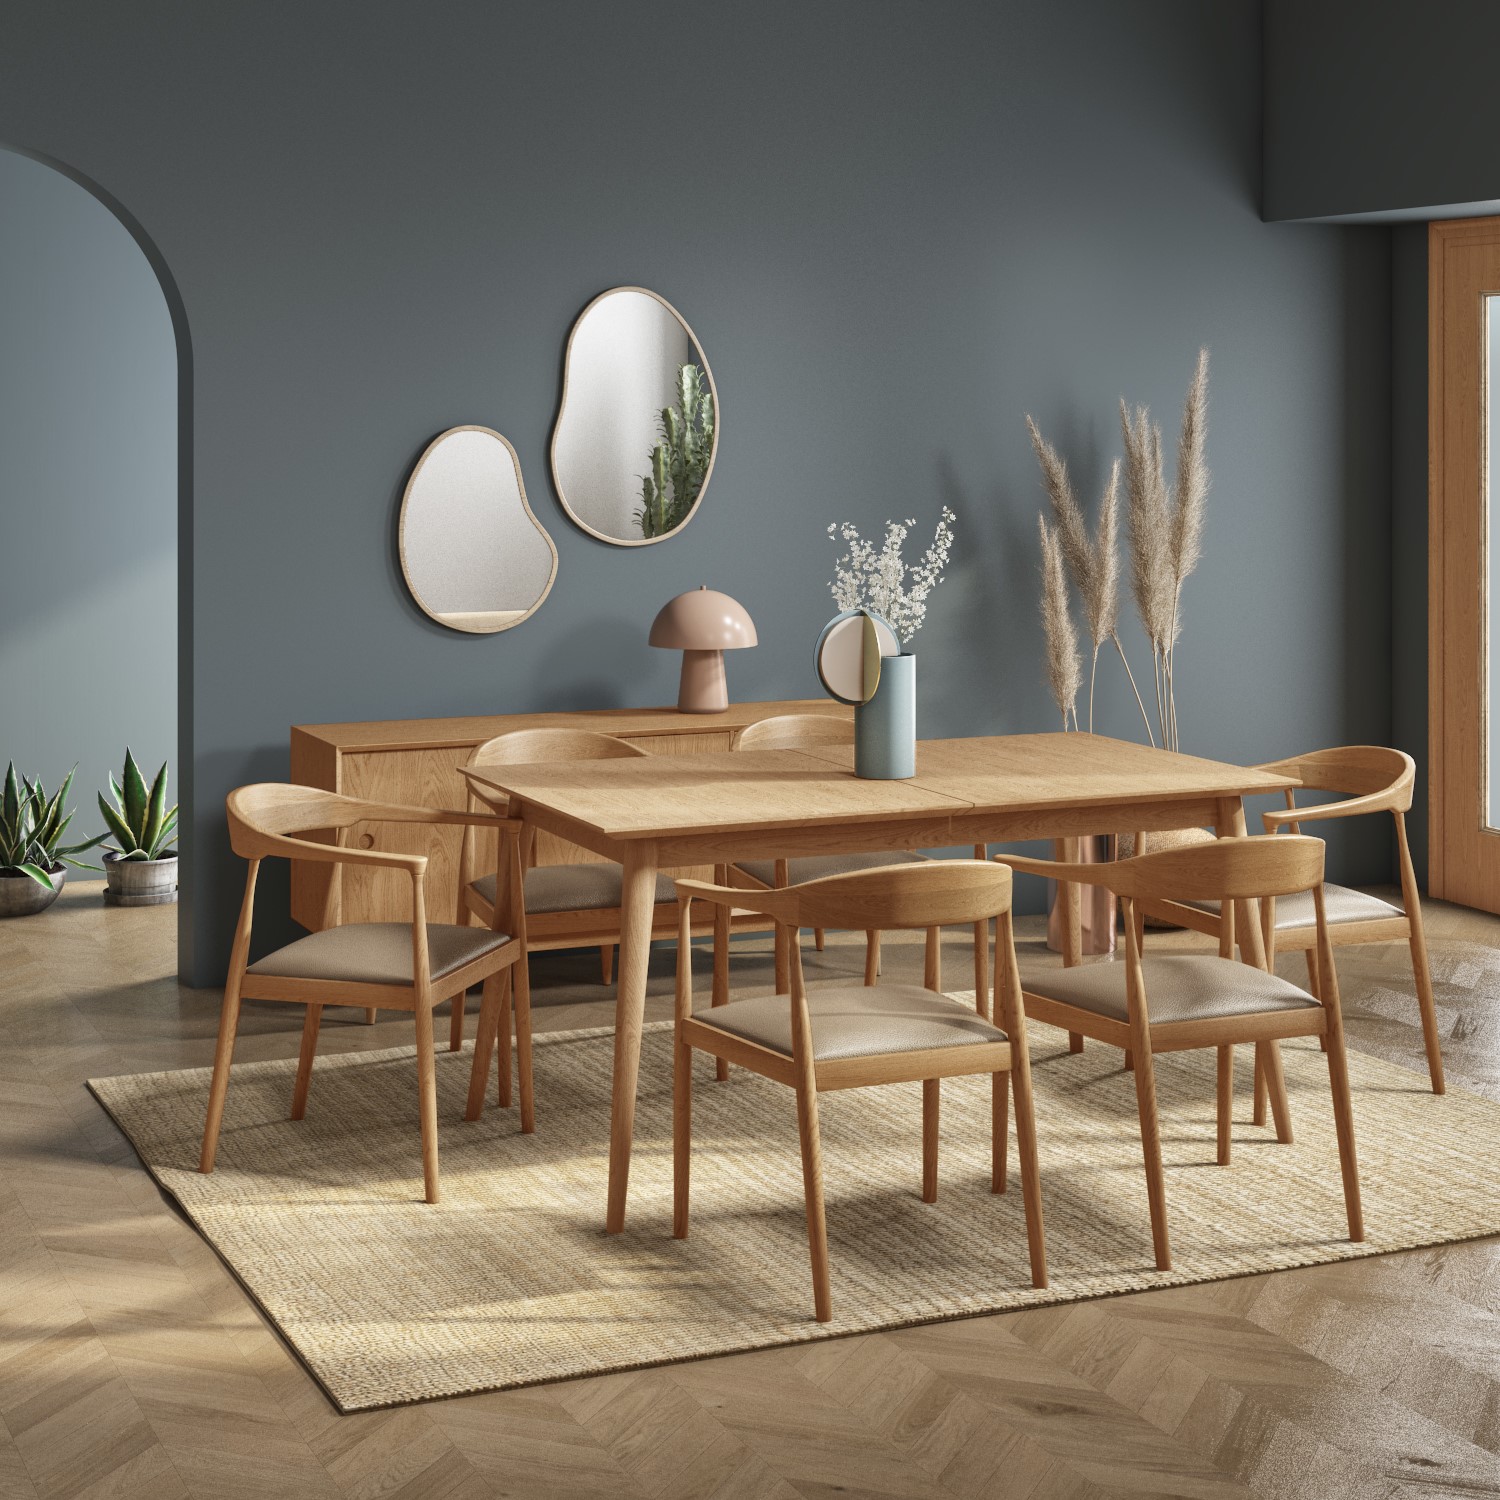 Solid Oak Extendable Dining Table With, Oak Wood Dining Room Chairs